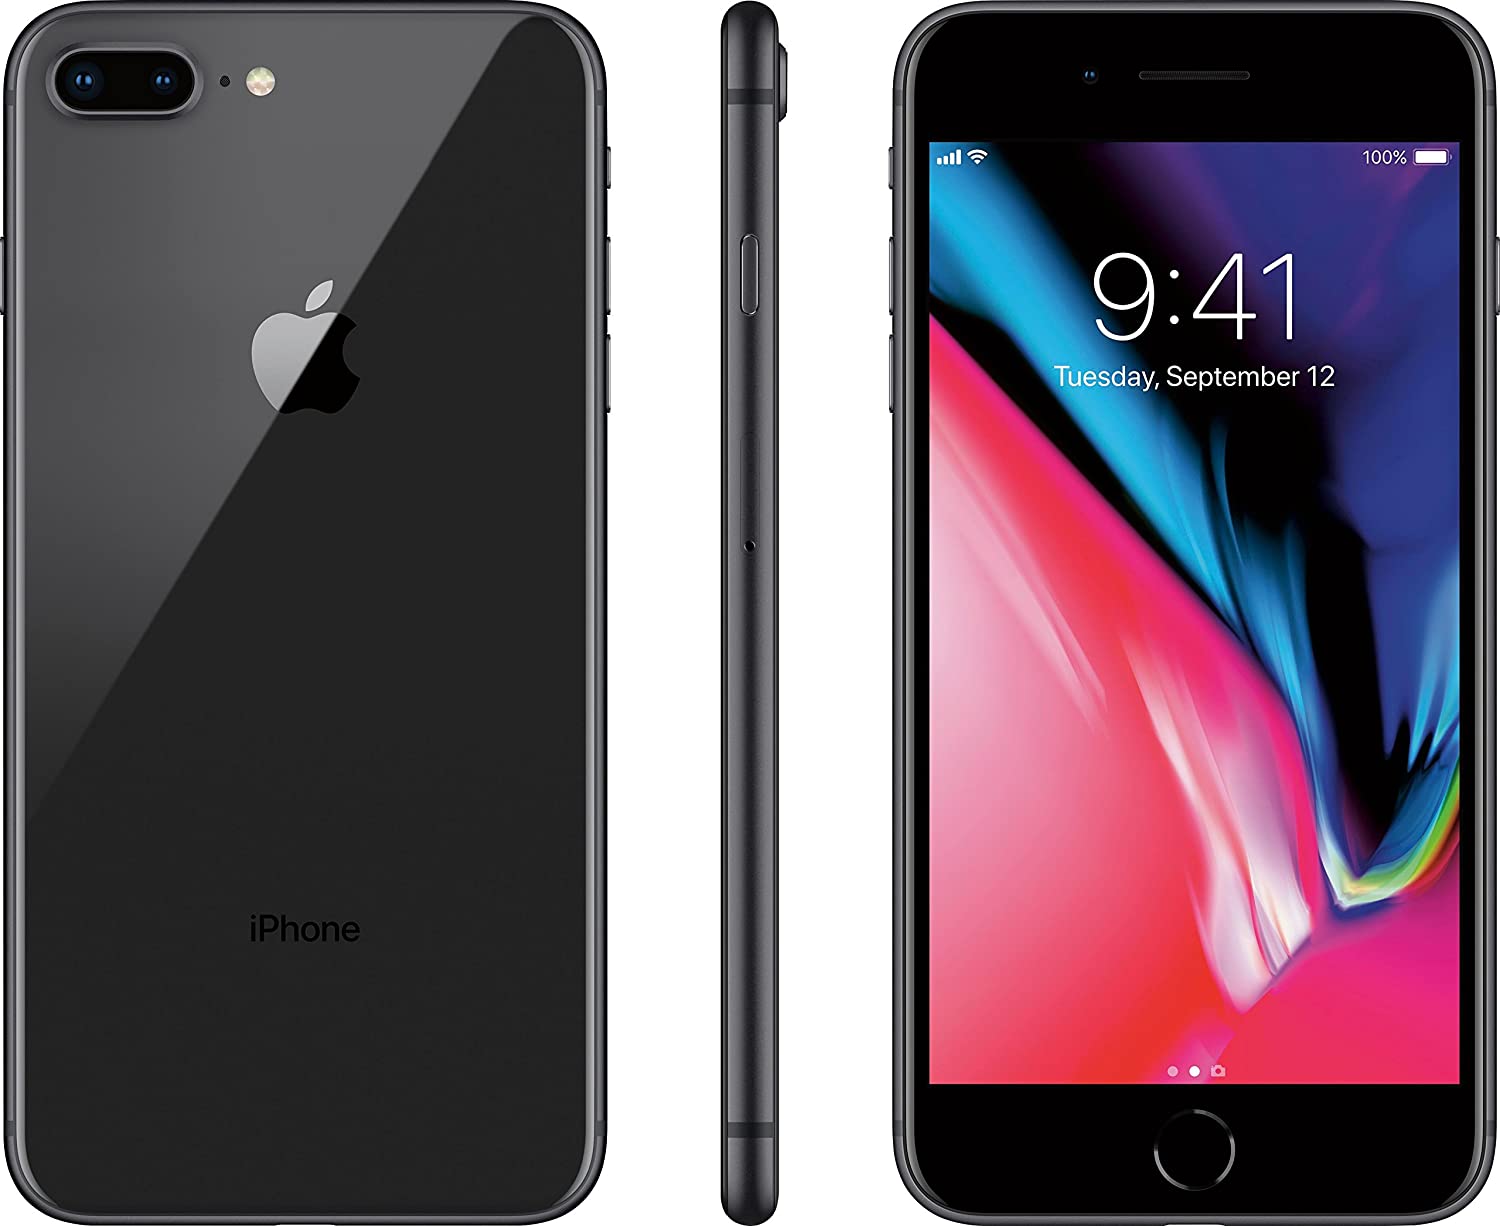 APPLE iPhone 8 Plus 64GB A1897 UNLOCKED SMARTPHONE-BLK  Refurbished with Charger - Atlas Computers & Electronics 